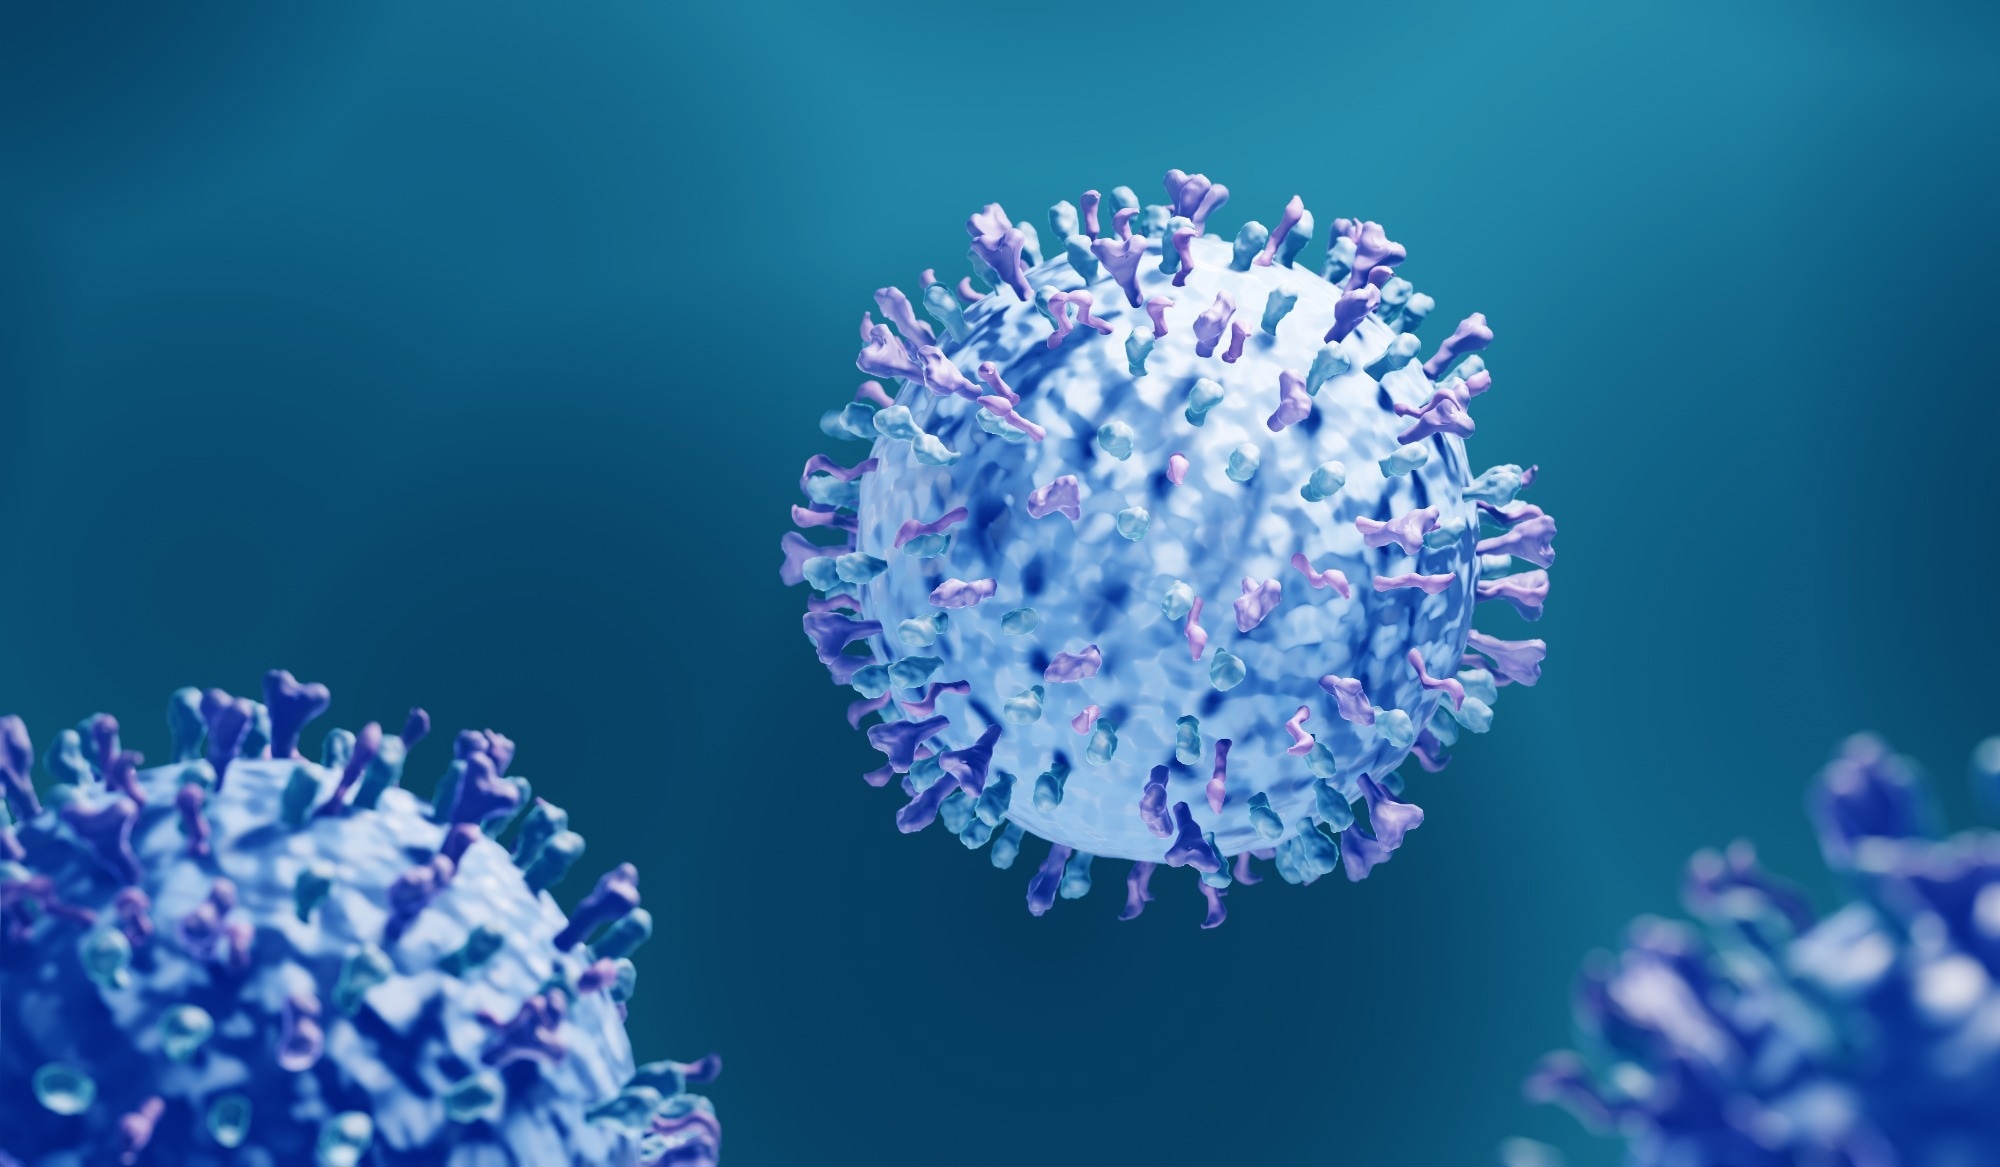 Study: Early and intense epidemic of respiratory syncytial virus (RSV) in Denmark, August to December 2022. Image Credit: ART-ur/Shutterstock